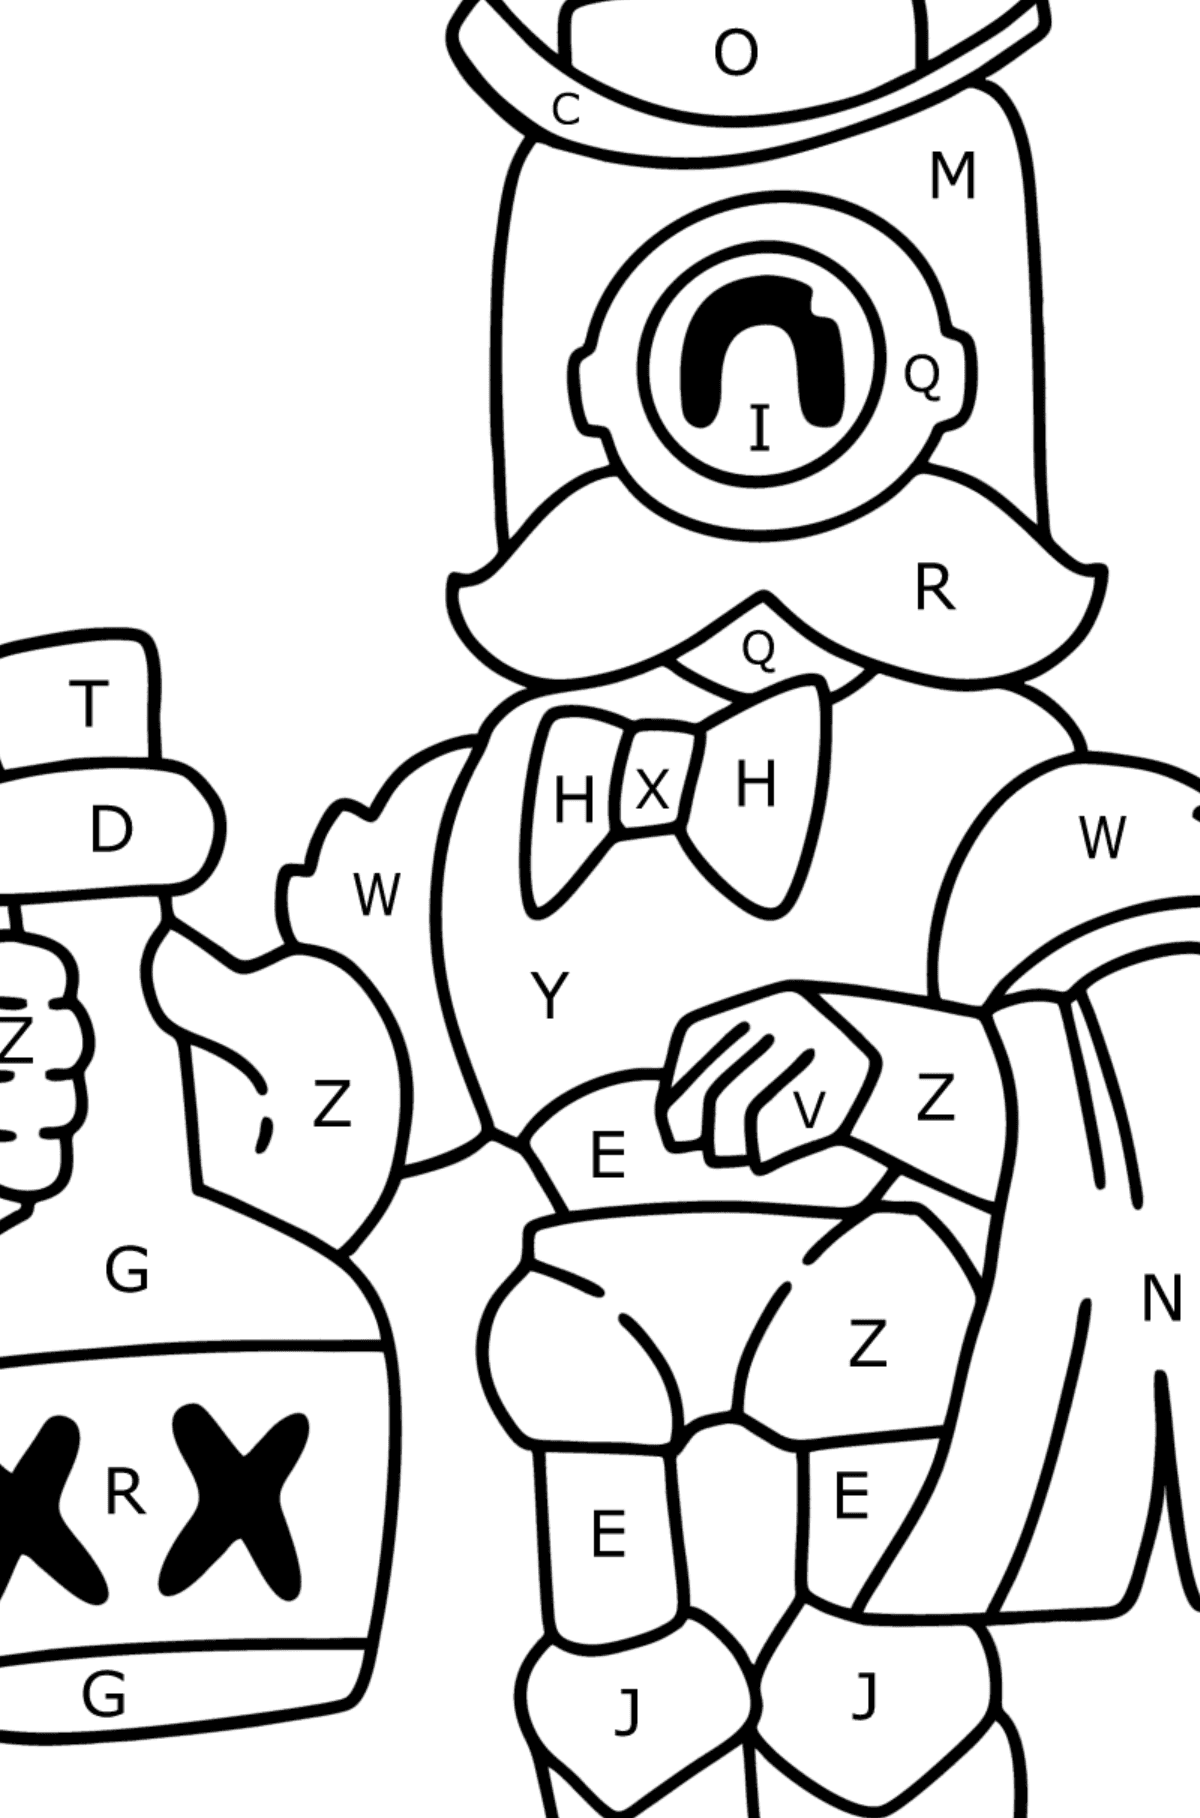 Brawl Stars Barley colouring page - Coloring by Letters for Kids